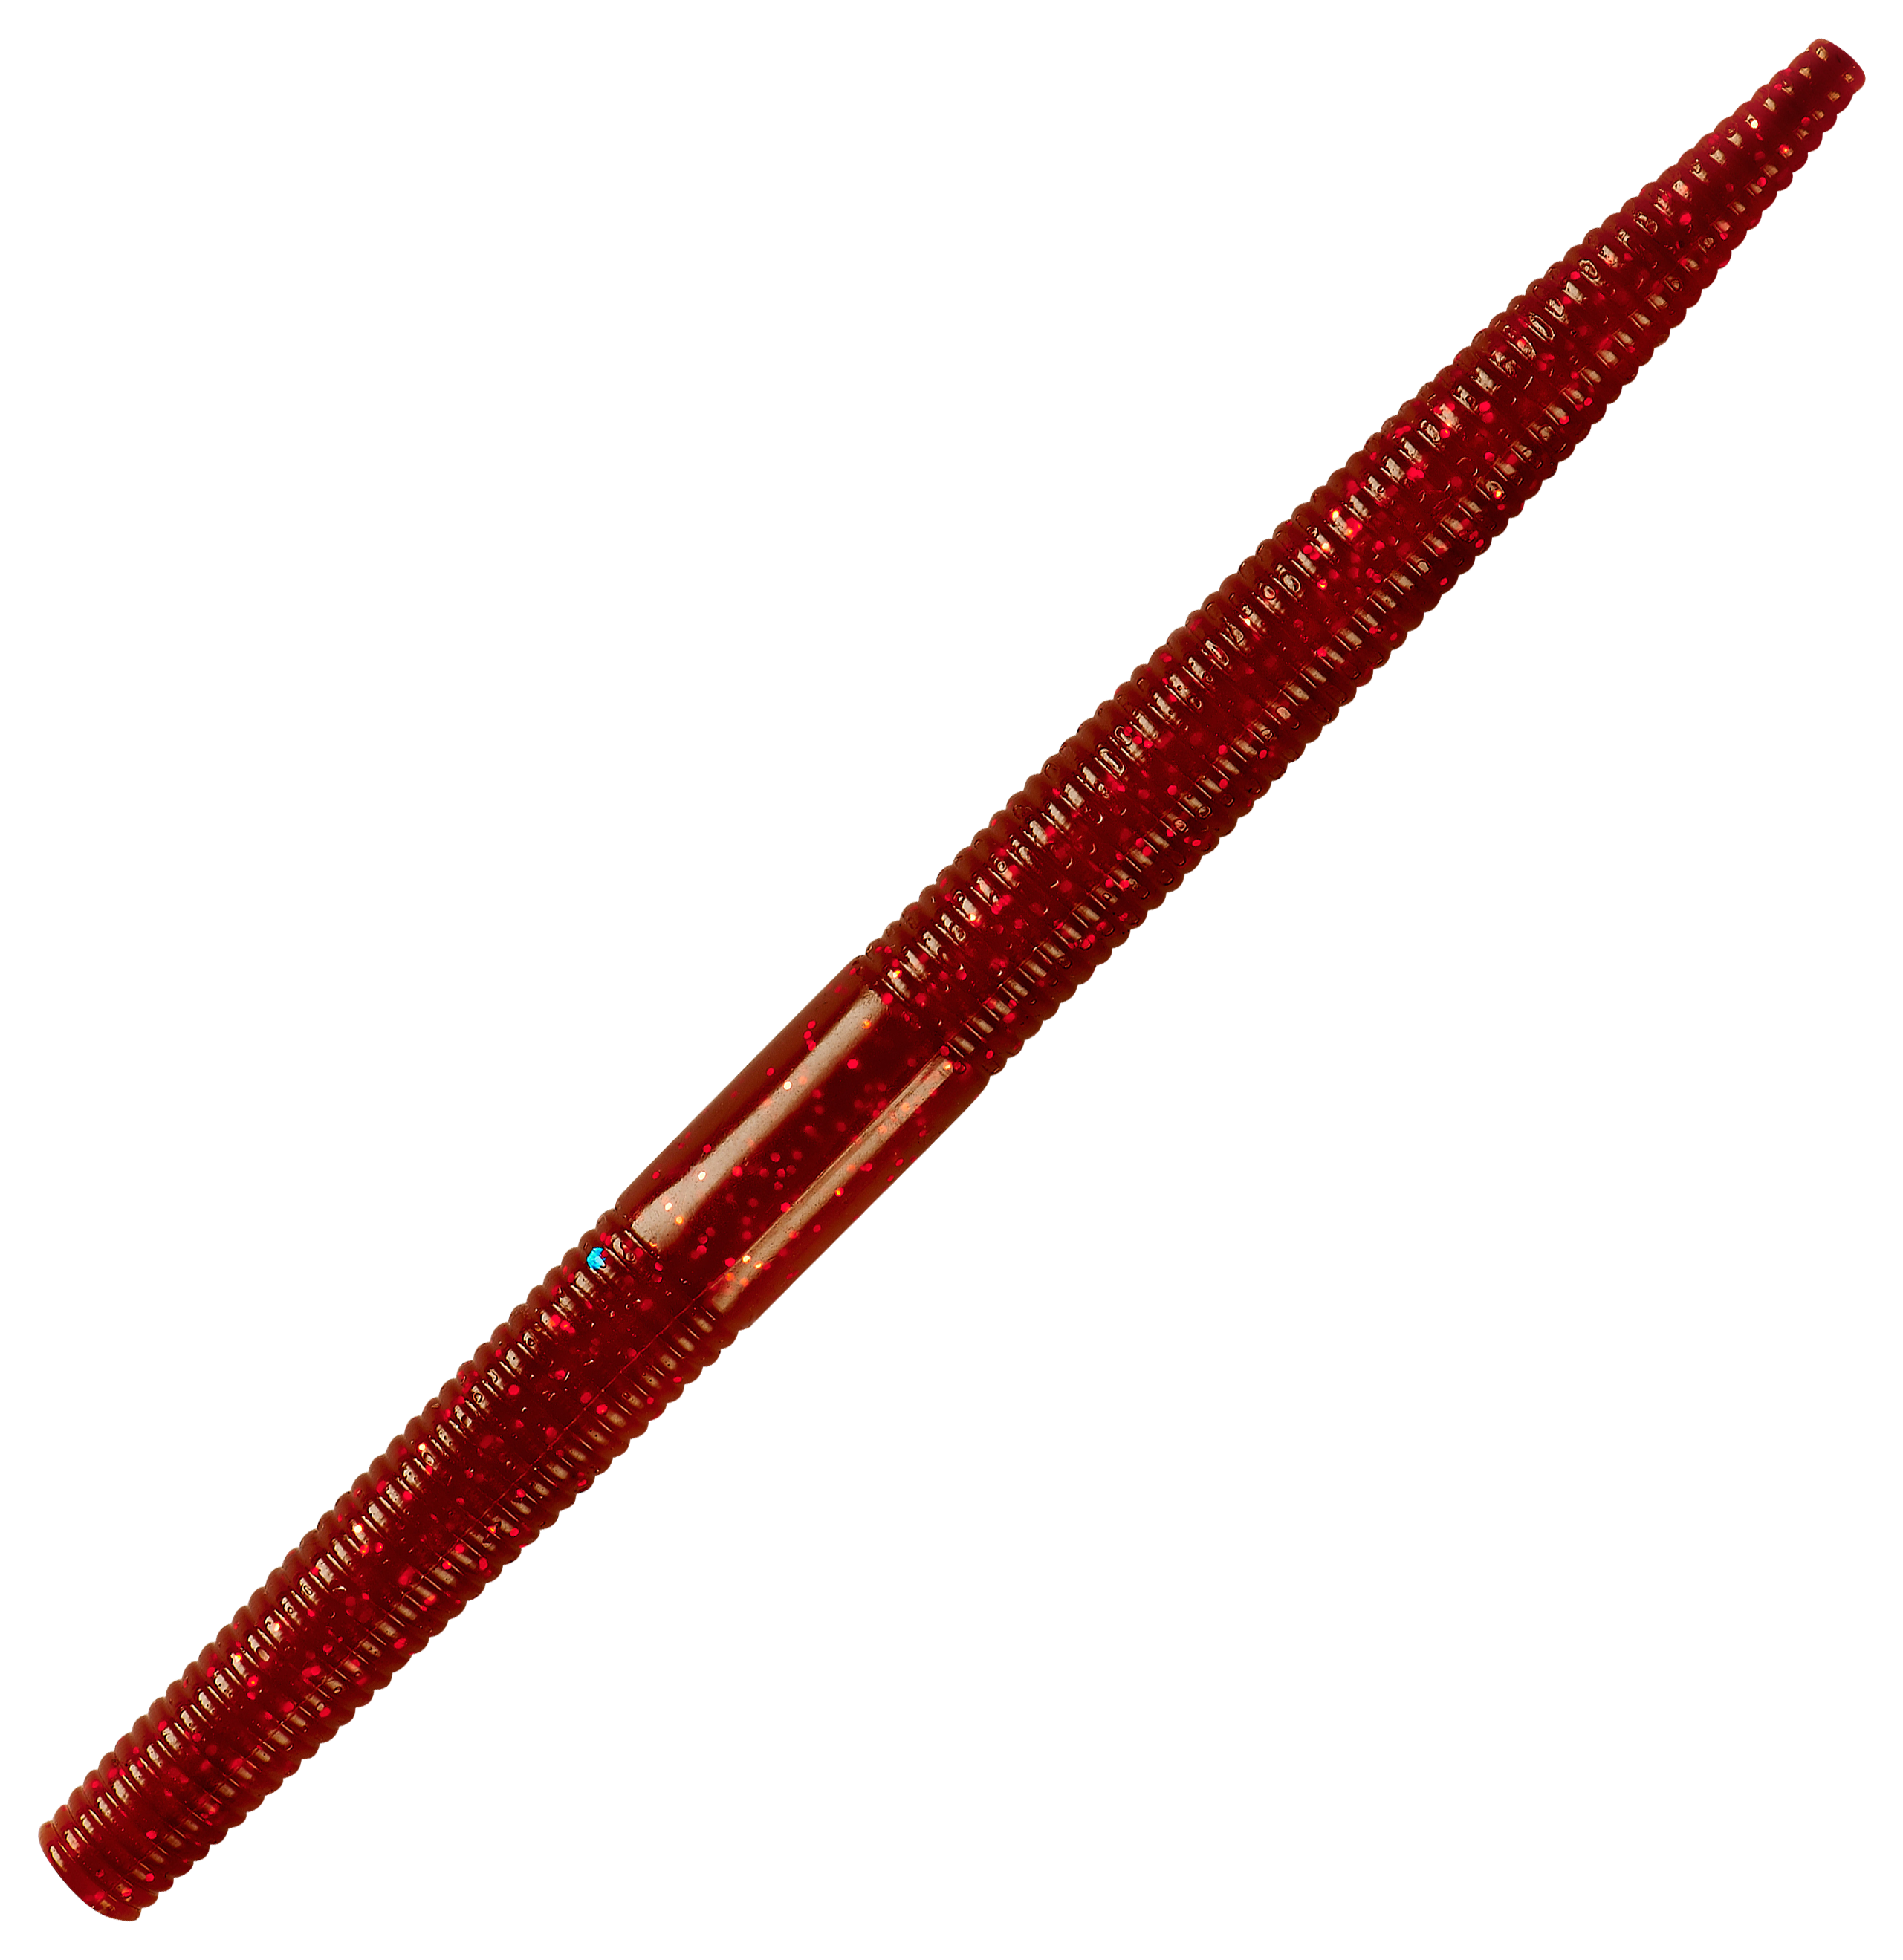 YUM Dinger - 4' - Oxblood Red Flake